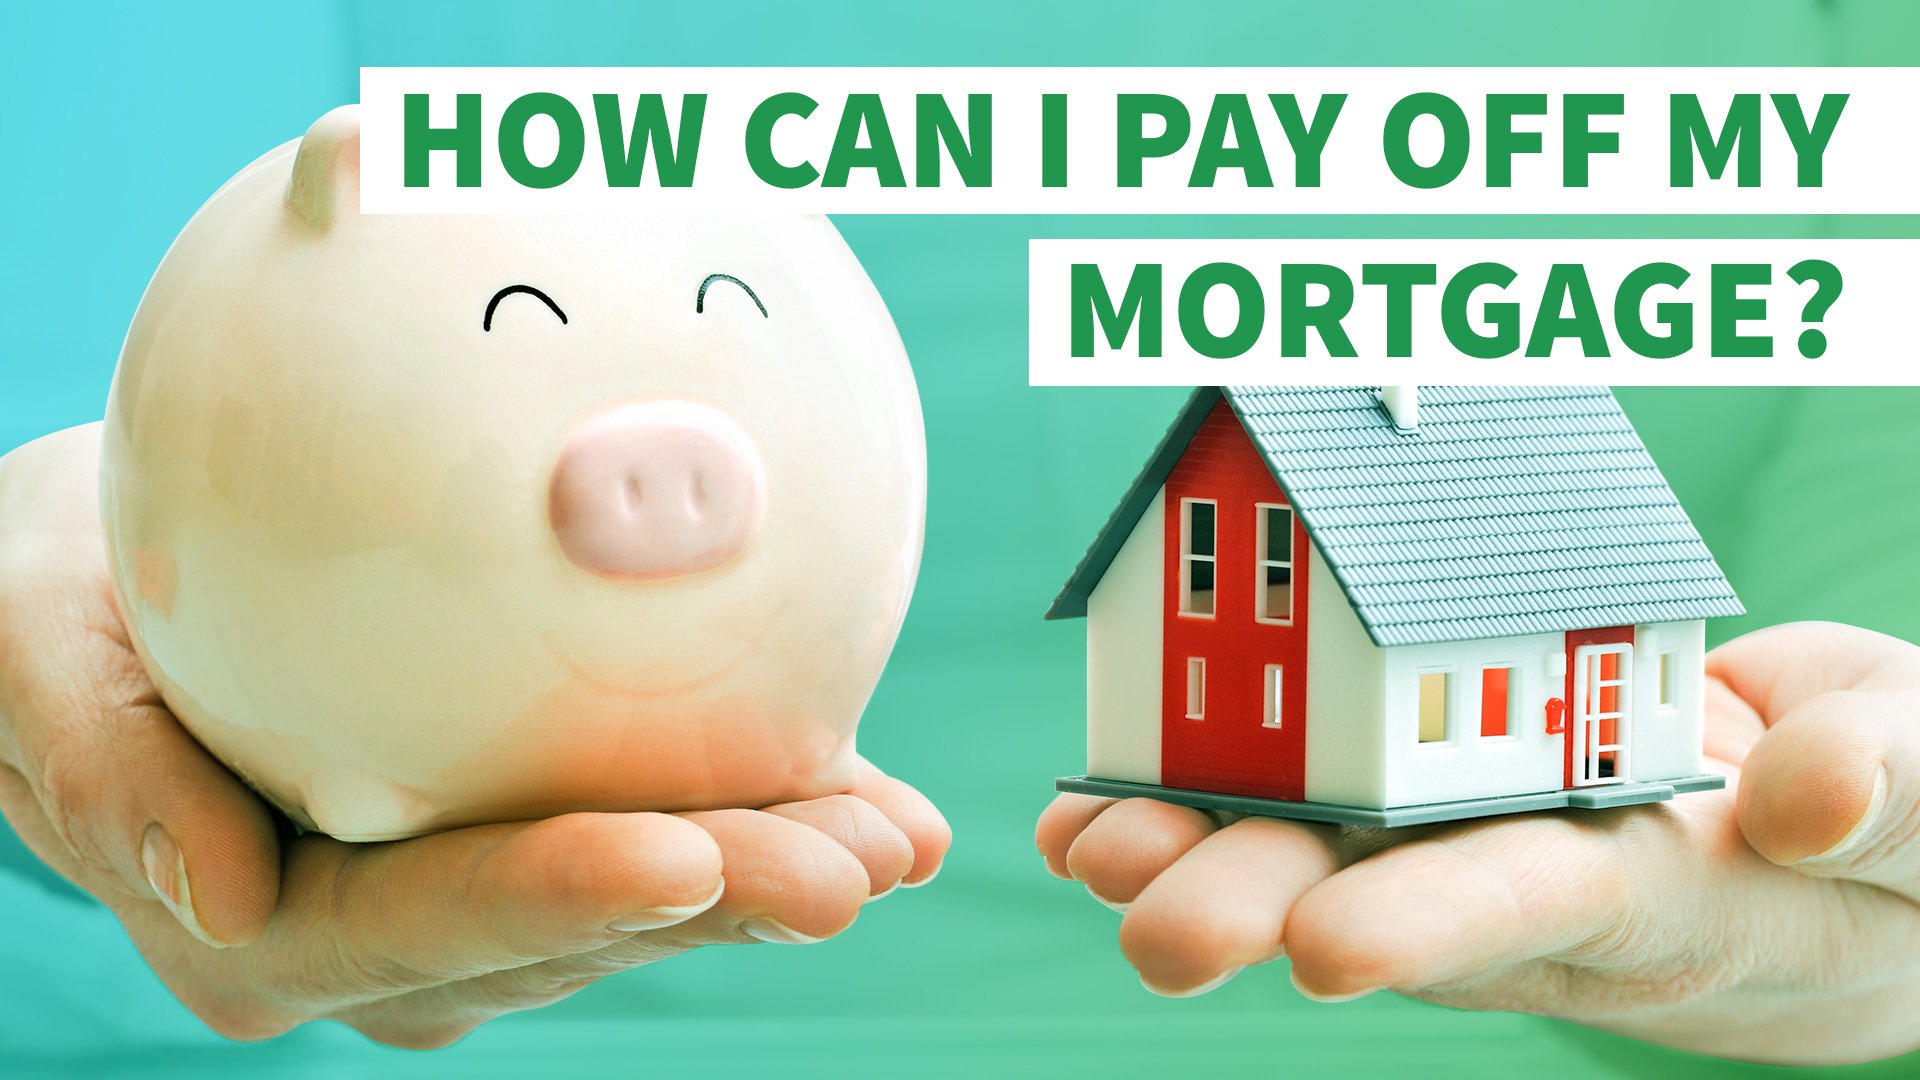 How Can I Pay Off My Mortgage?